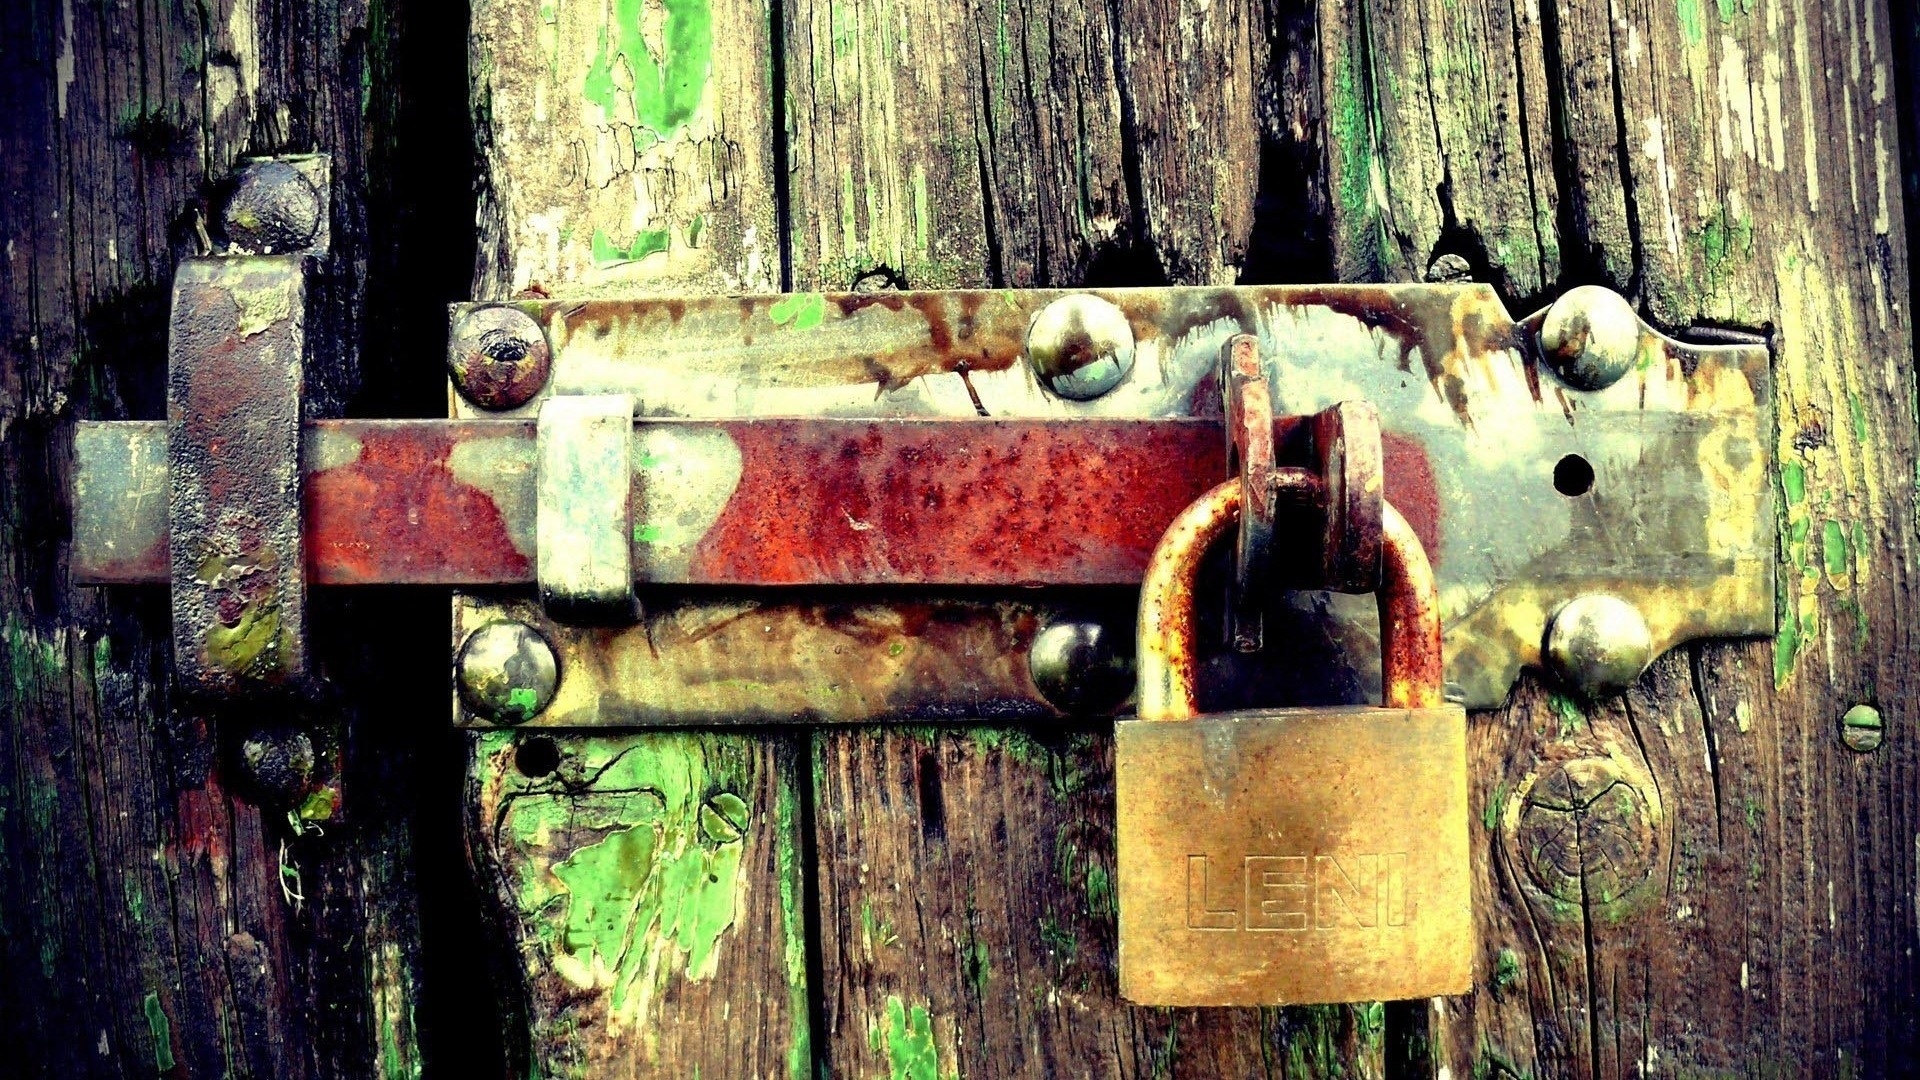 Padlock on the gate for 1920 x 1080 HDTV 1080p resolution